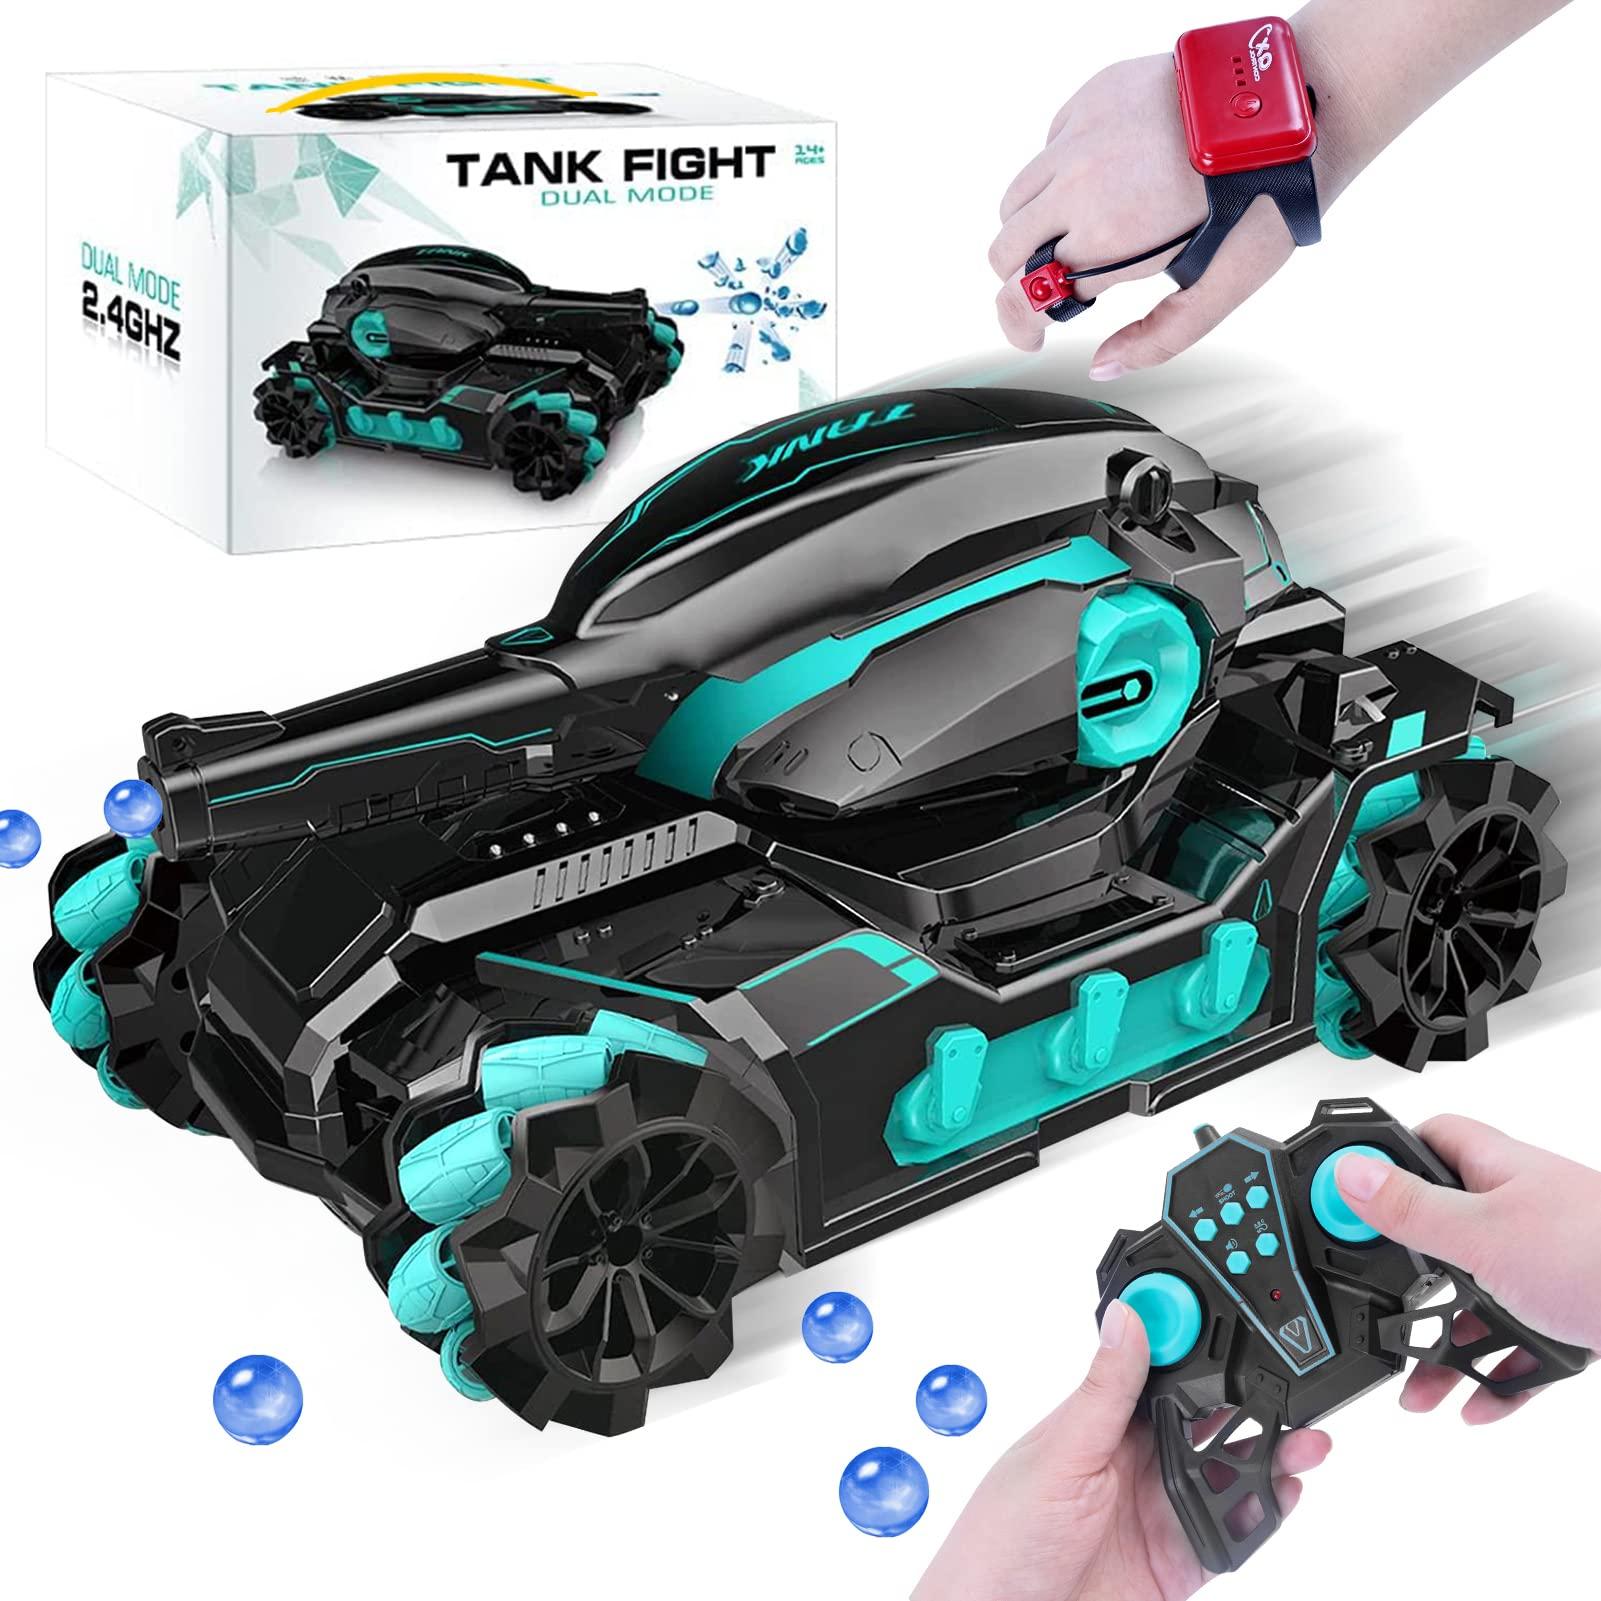 Rc Toy Tank Hand Control: Experience Immersive Fun with RC Toy Tank Hand Control